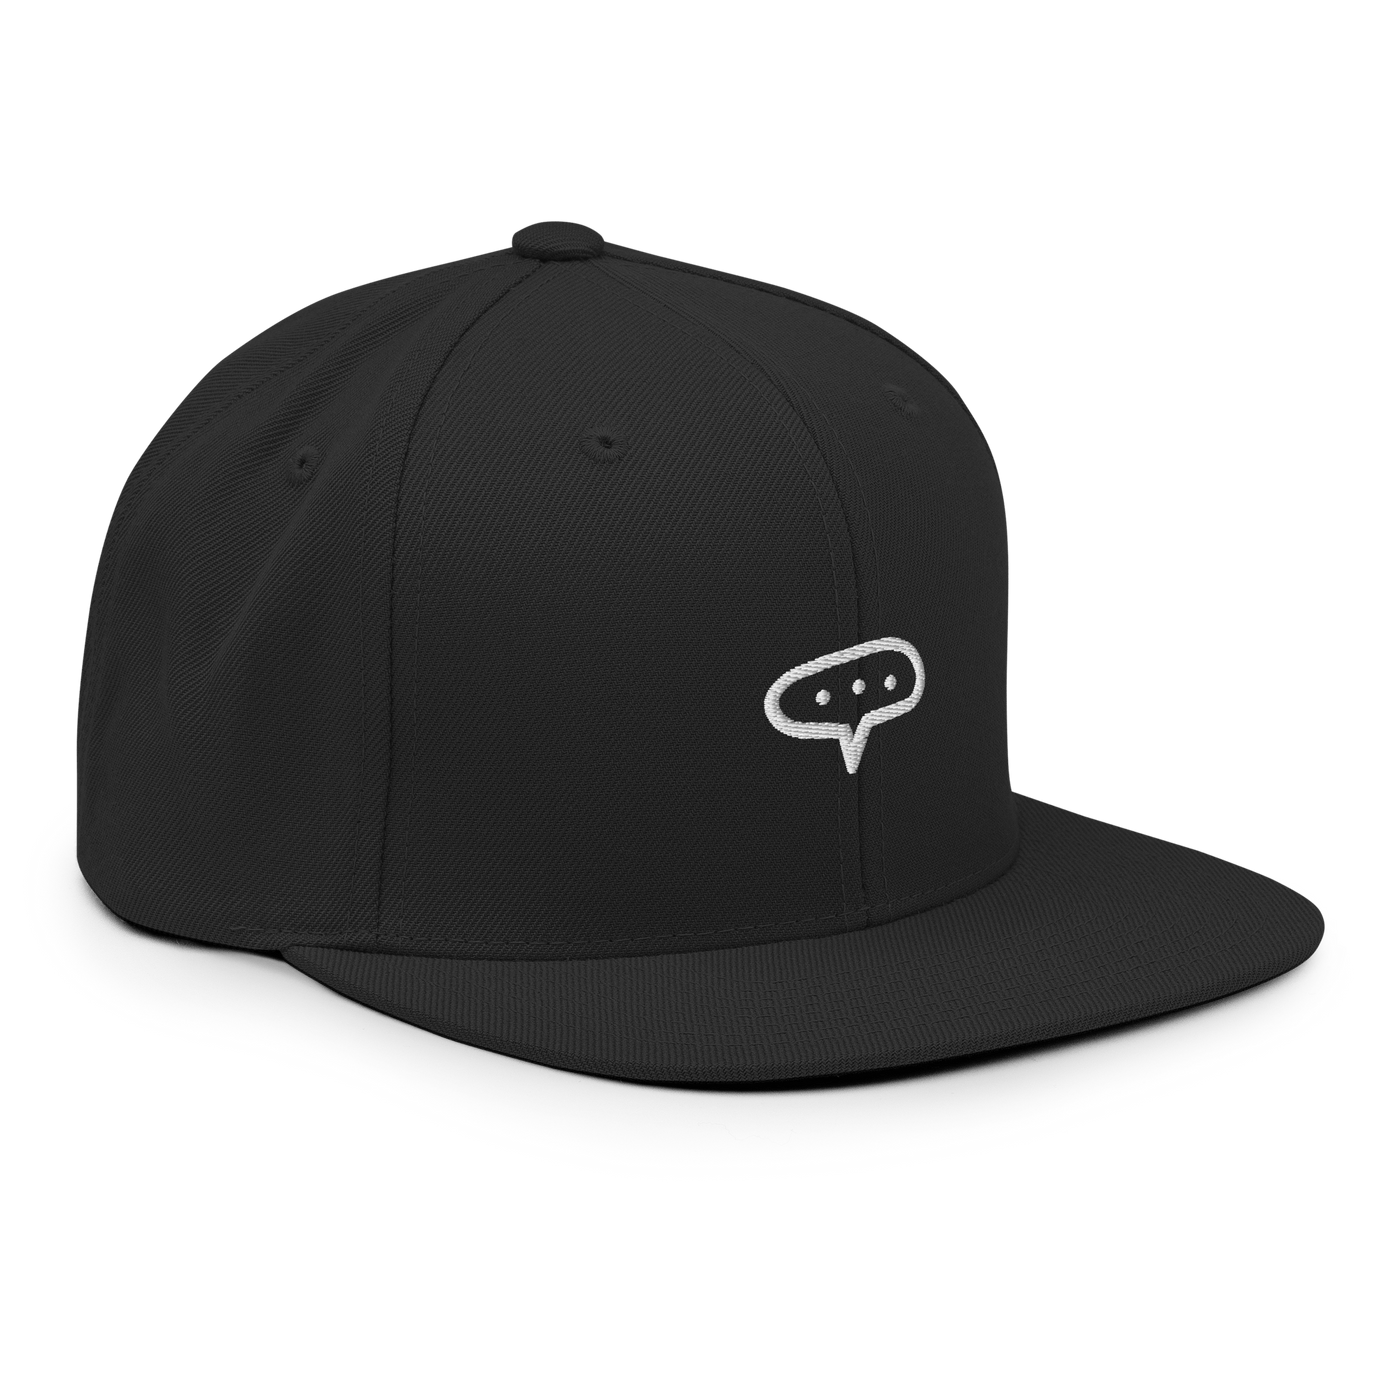 Thinking Snapback Hat - Black - - Just Another Cap Store